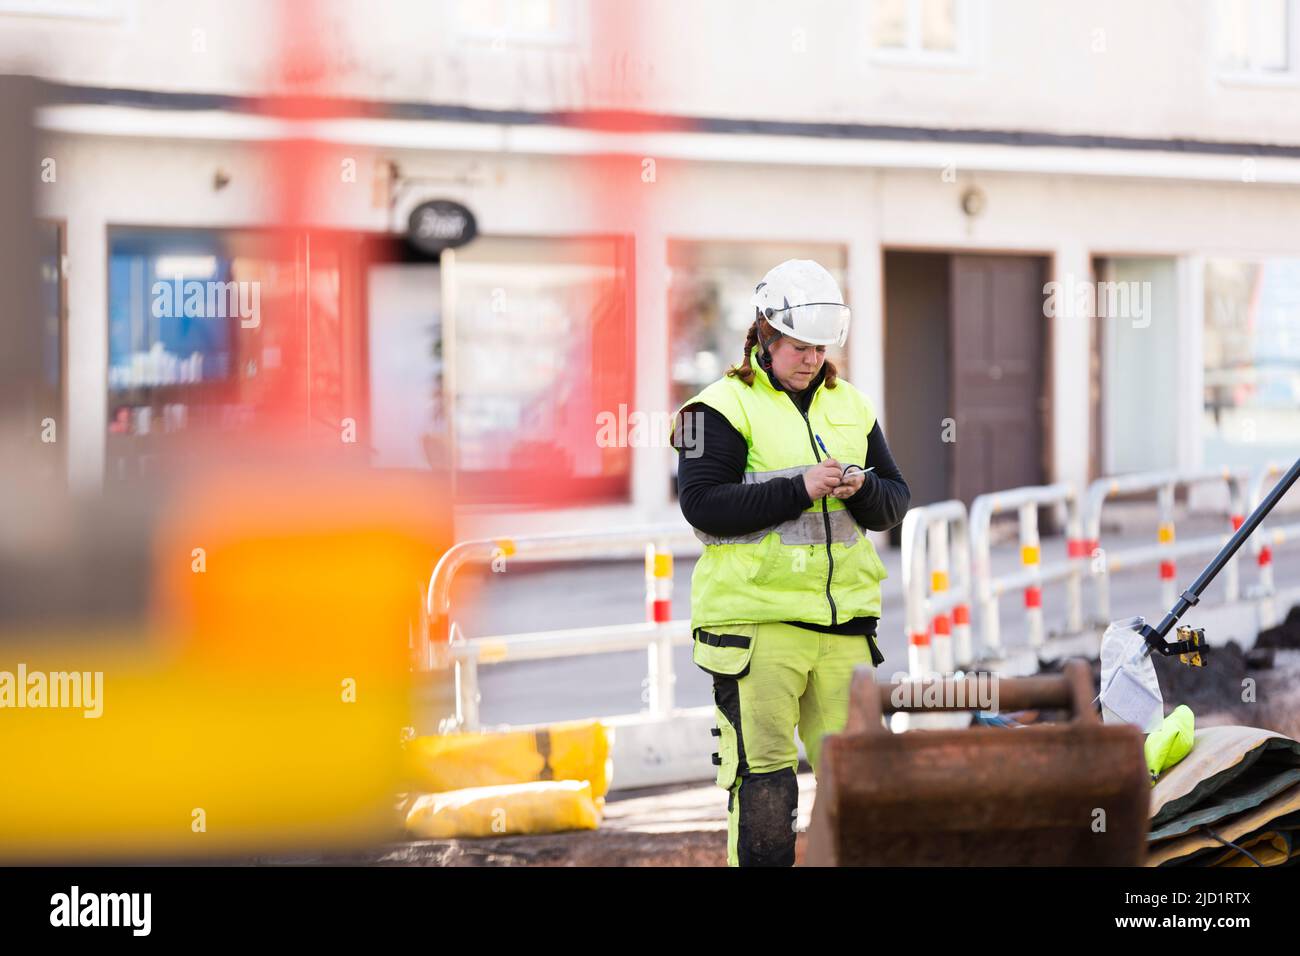 Worker in reflective clothing during work Stock Photo